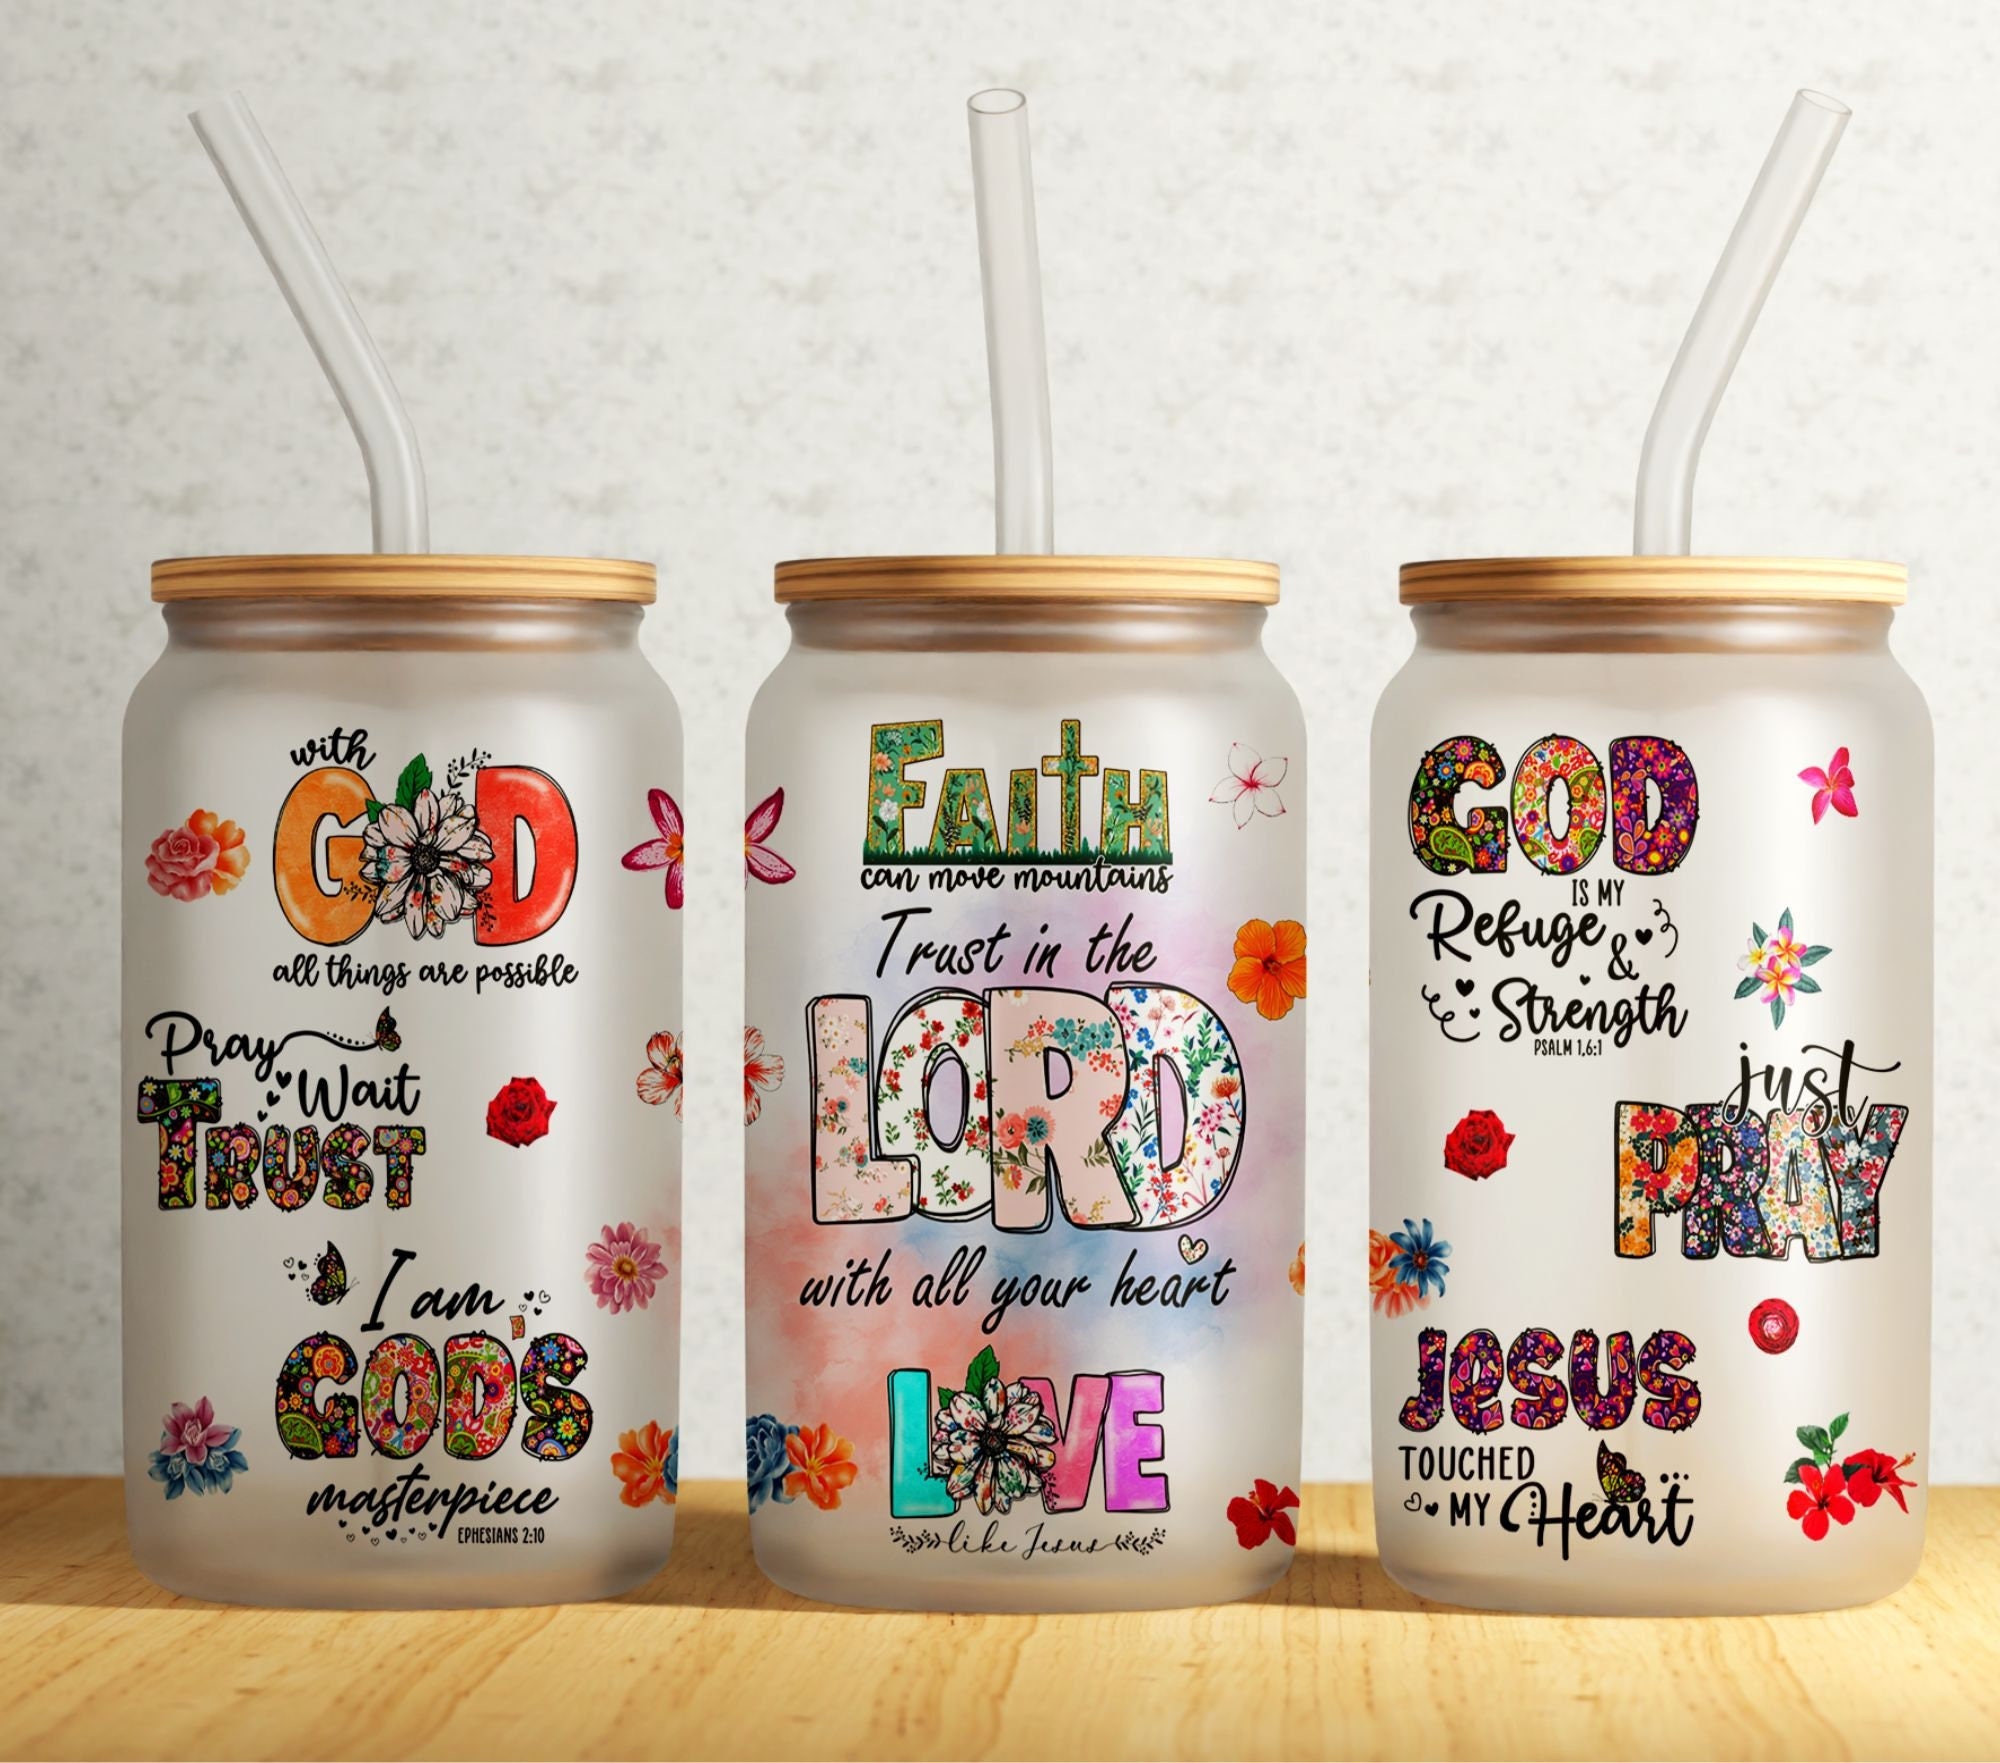 Fruit of the Spirit 20oz Glass Tumbler – Bibles and Coffee